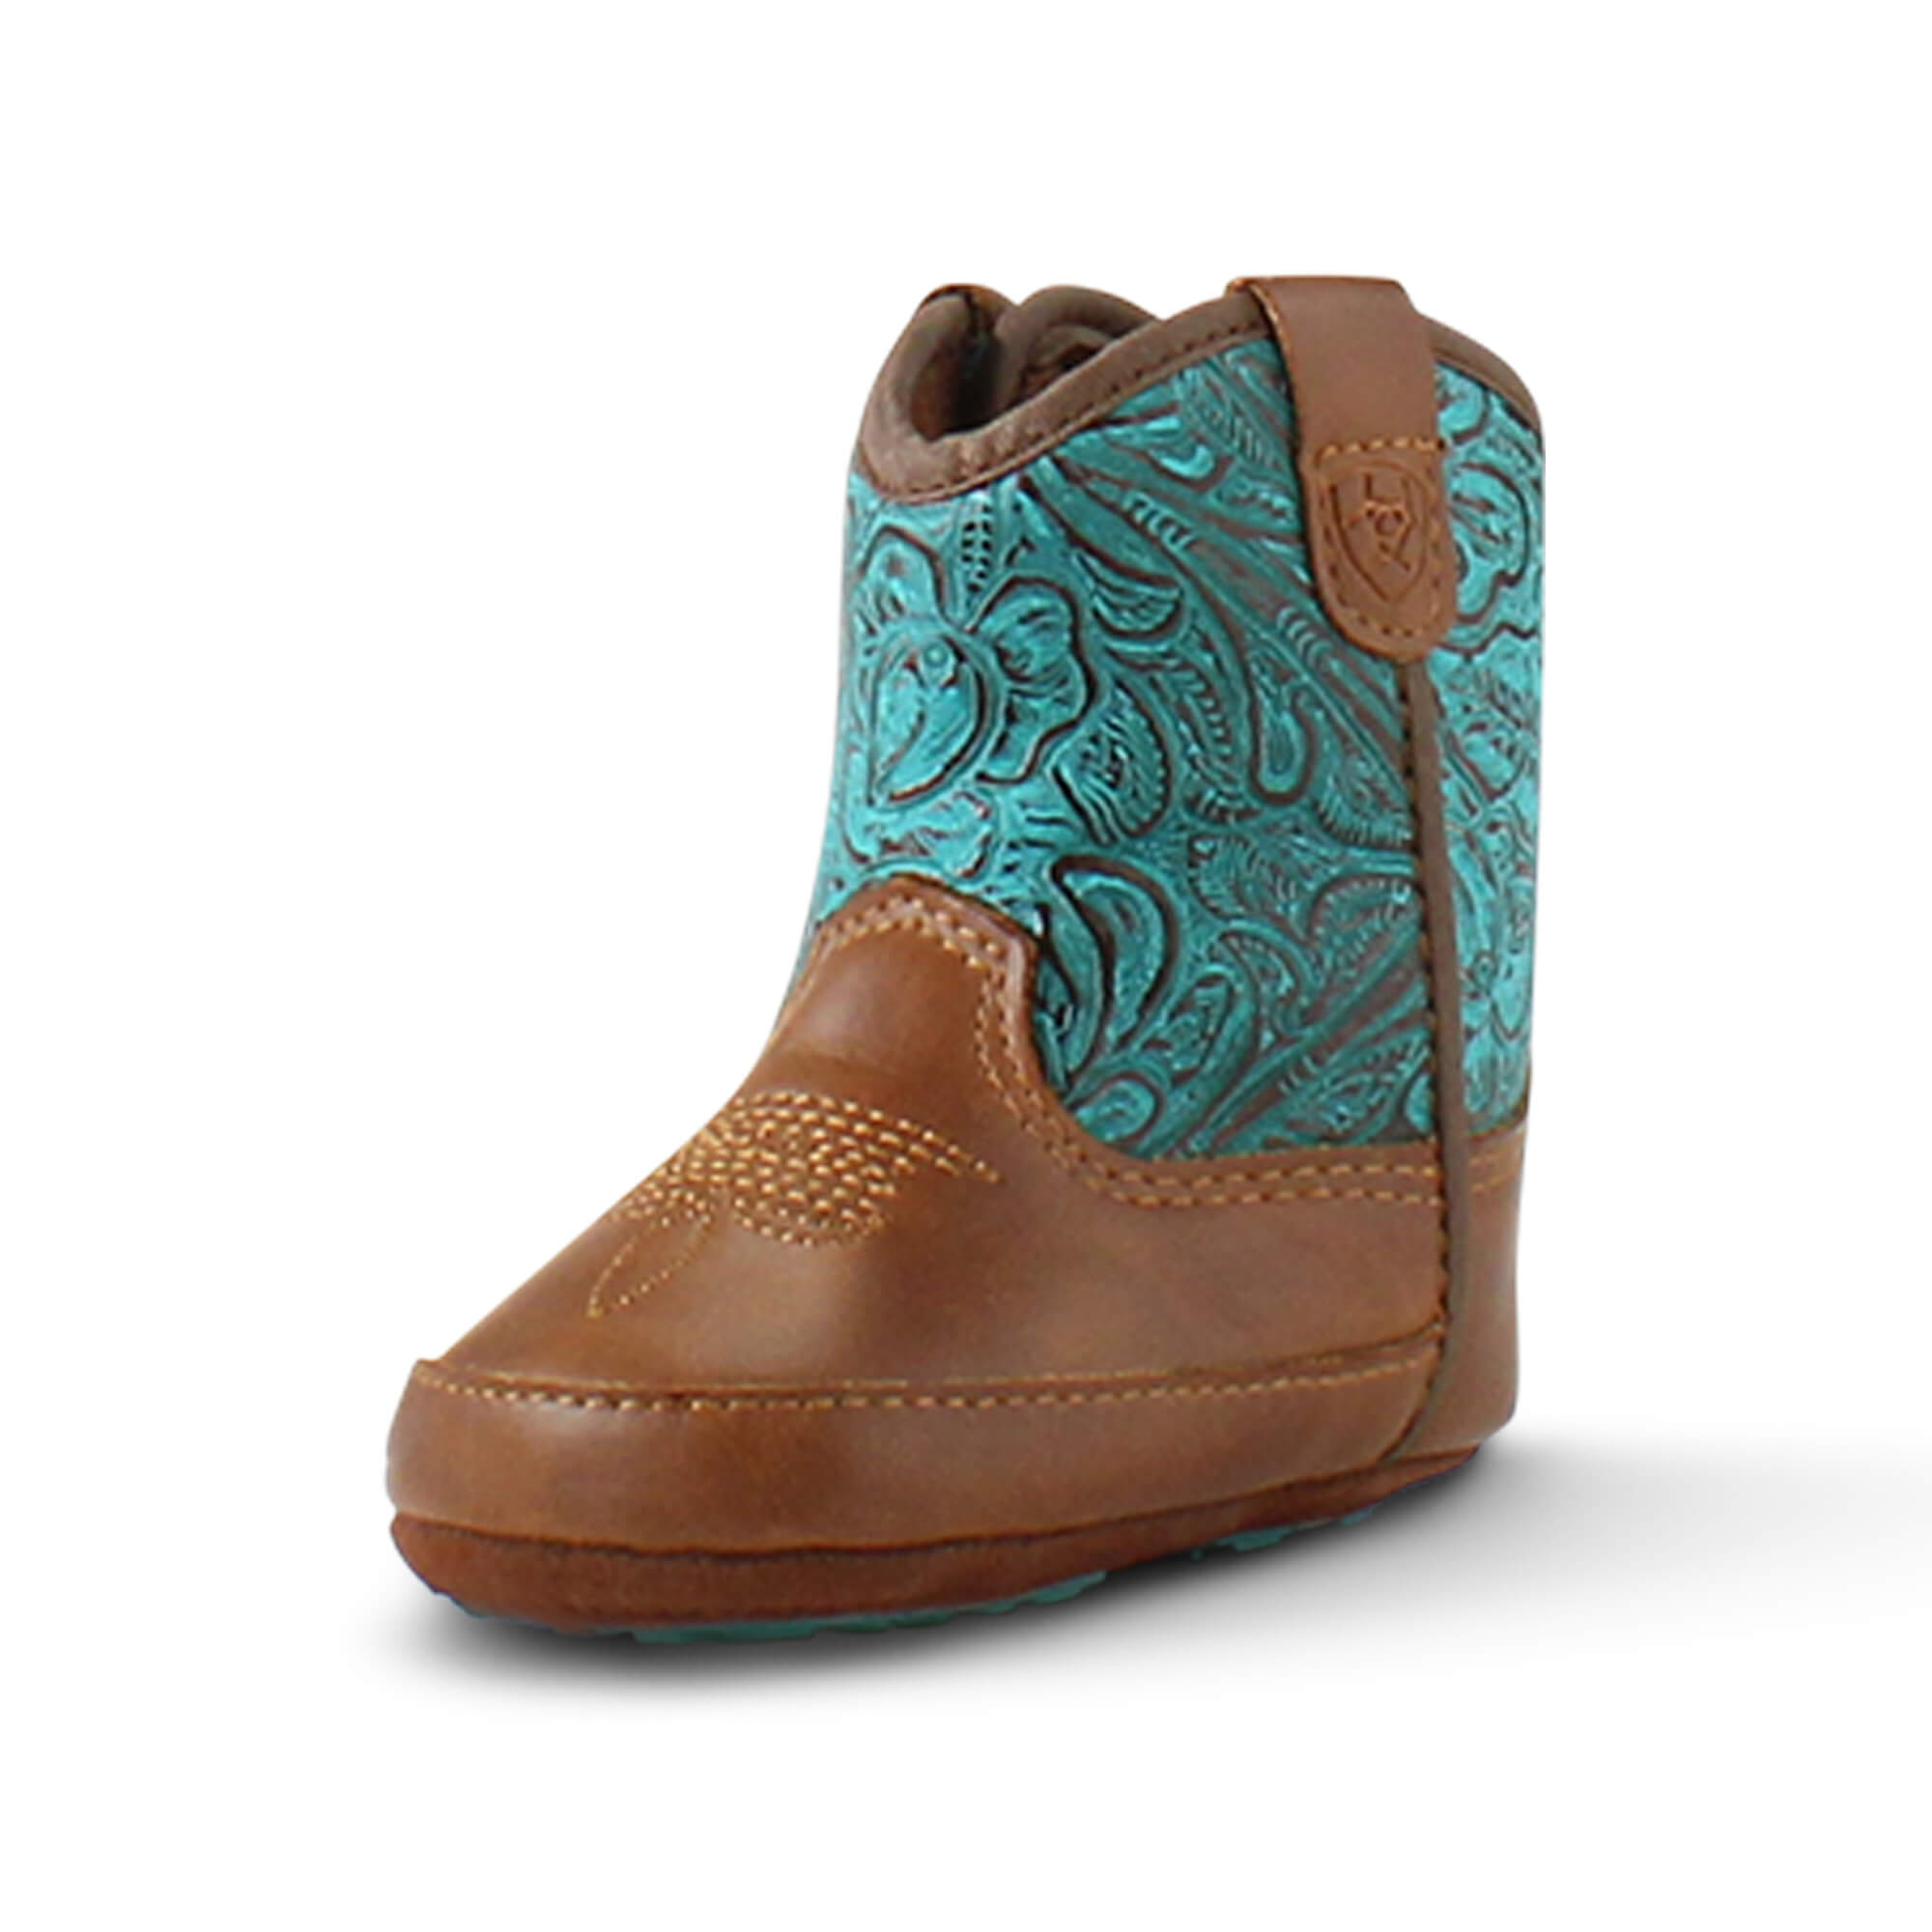 Infant Lil' Stompers Round Up Boot | Ariat